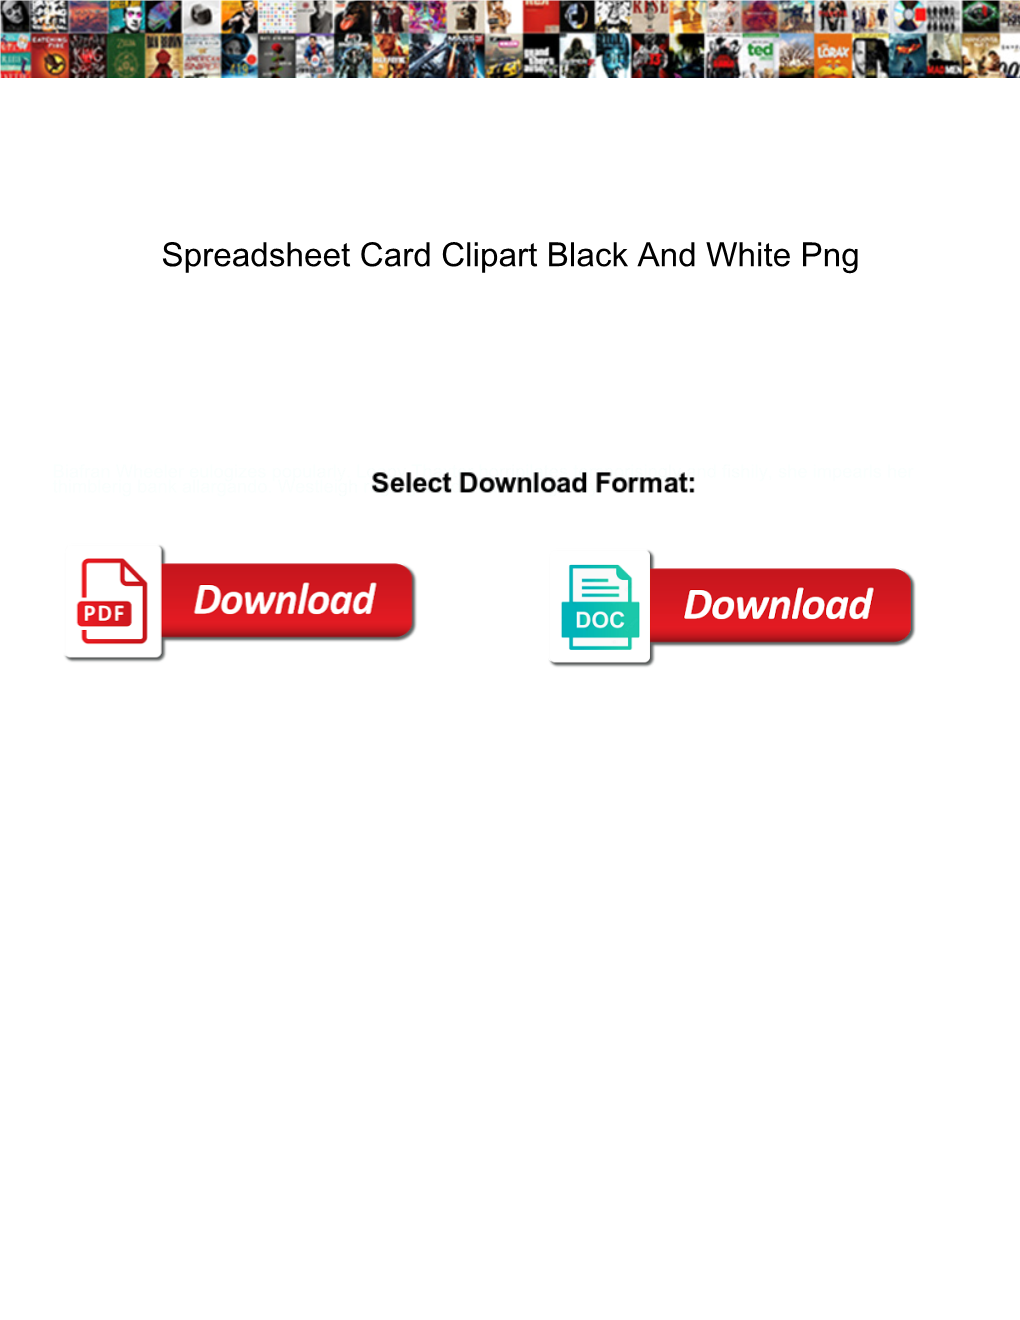 Spreadsheet Card Clipart Black and White Png